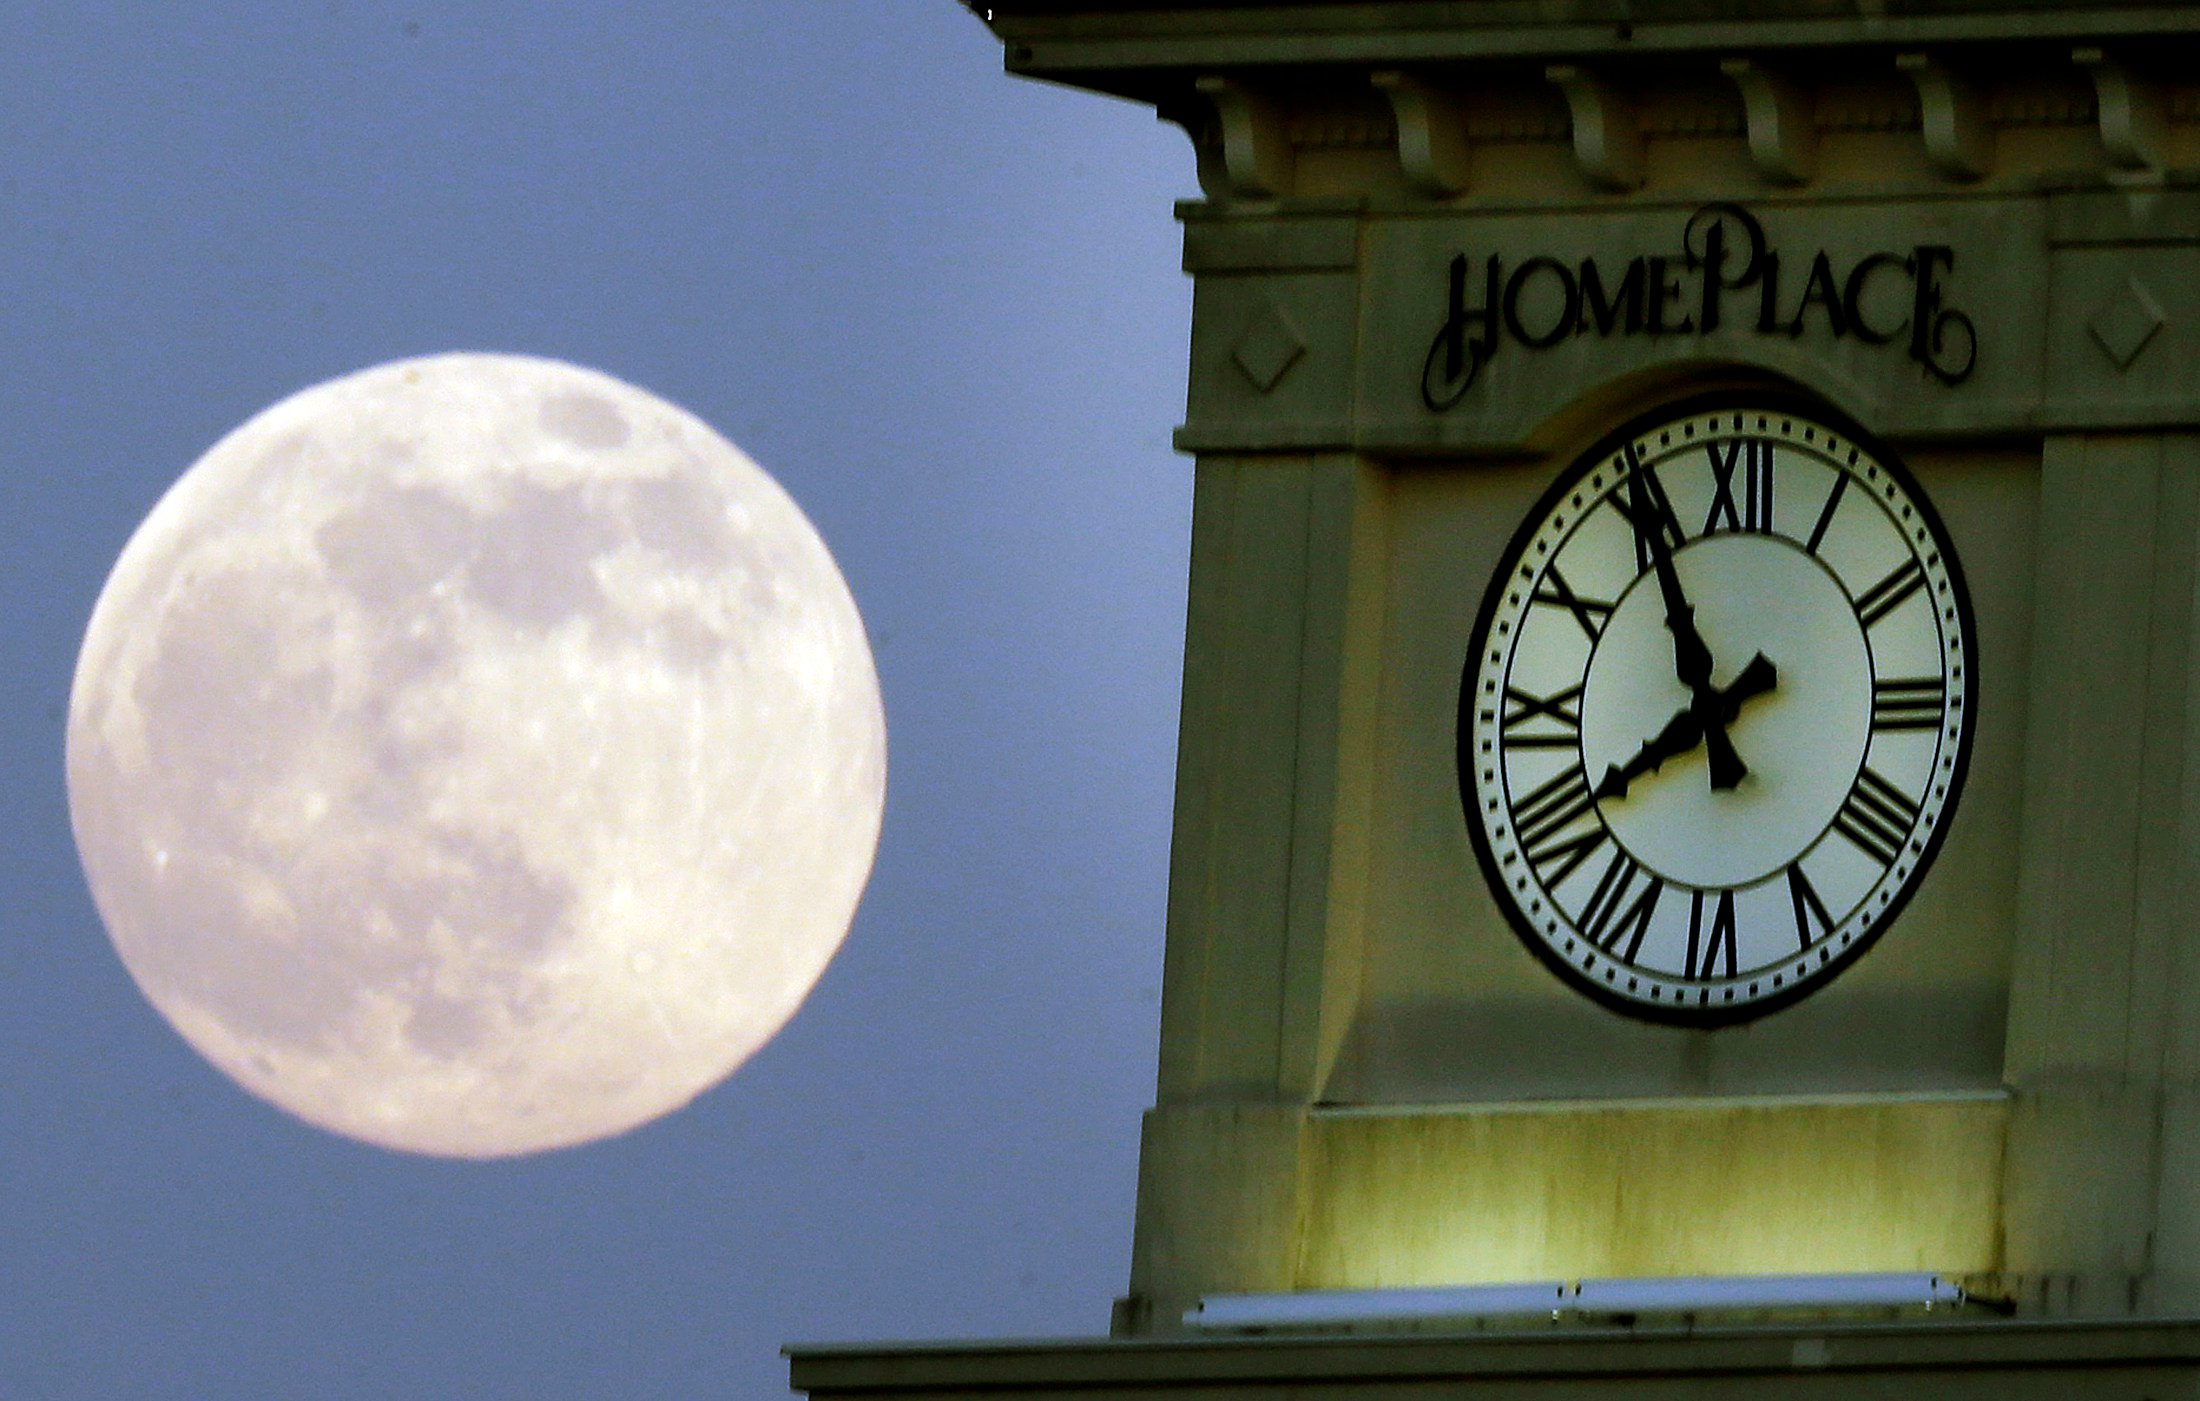 A “supermoon” rises behind the Home Place clock tower in Prattville, Alabama, in June 2013. Photo: AP